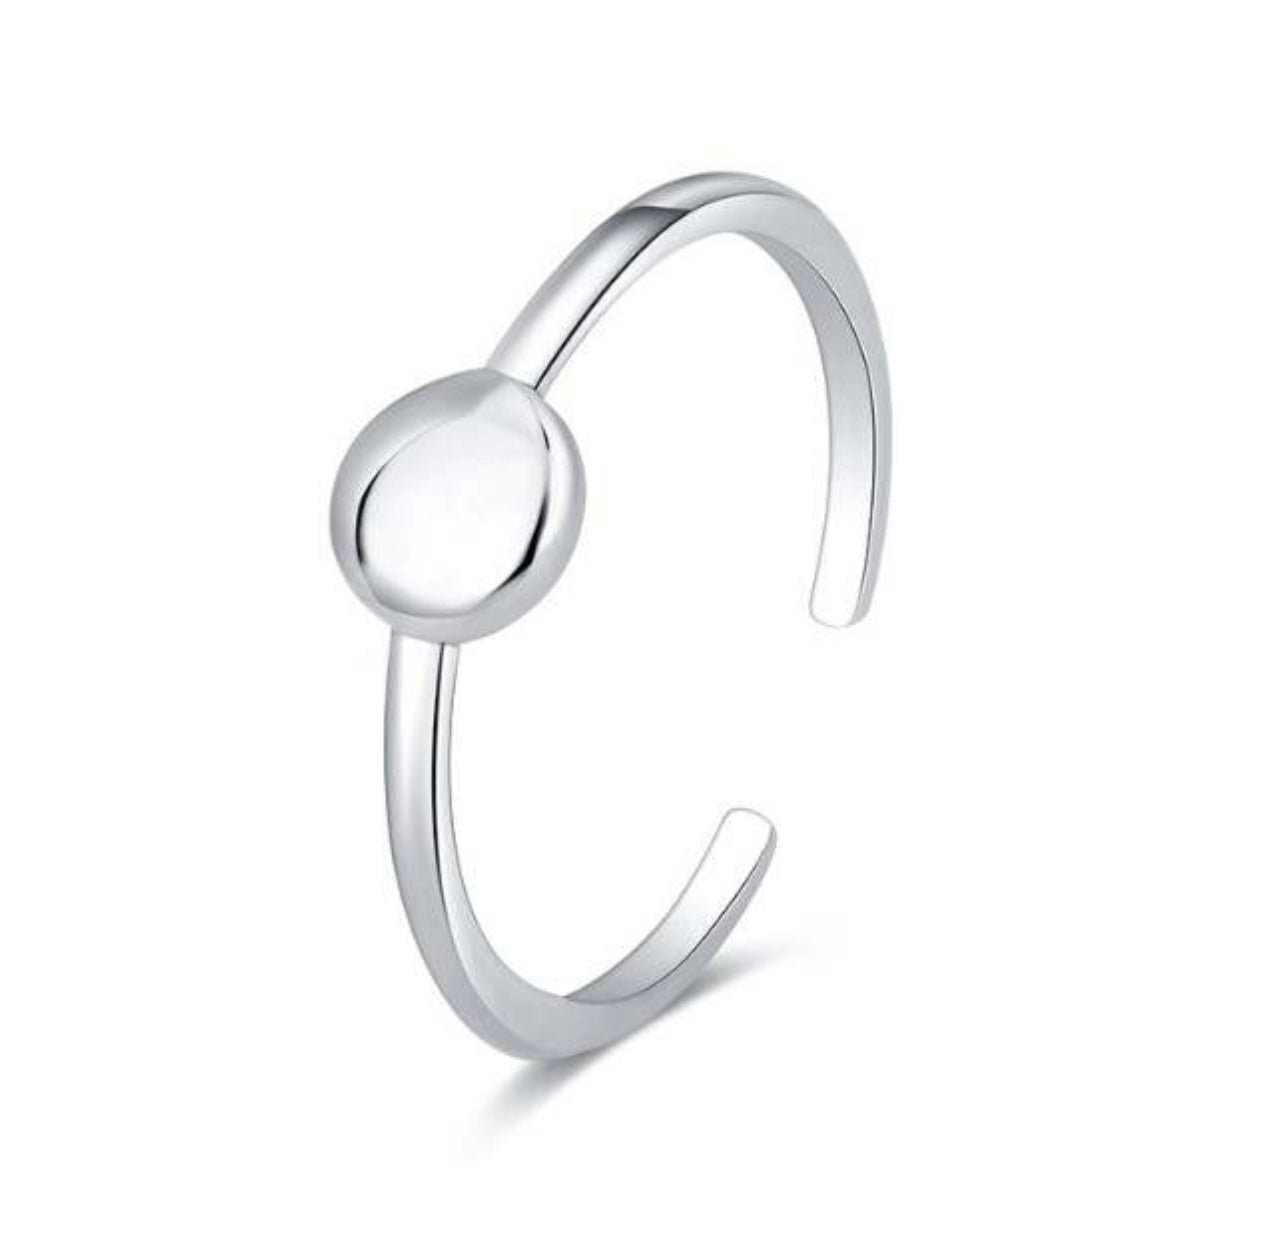 The minimalist Dot sterling silver ring